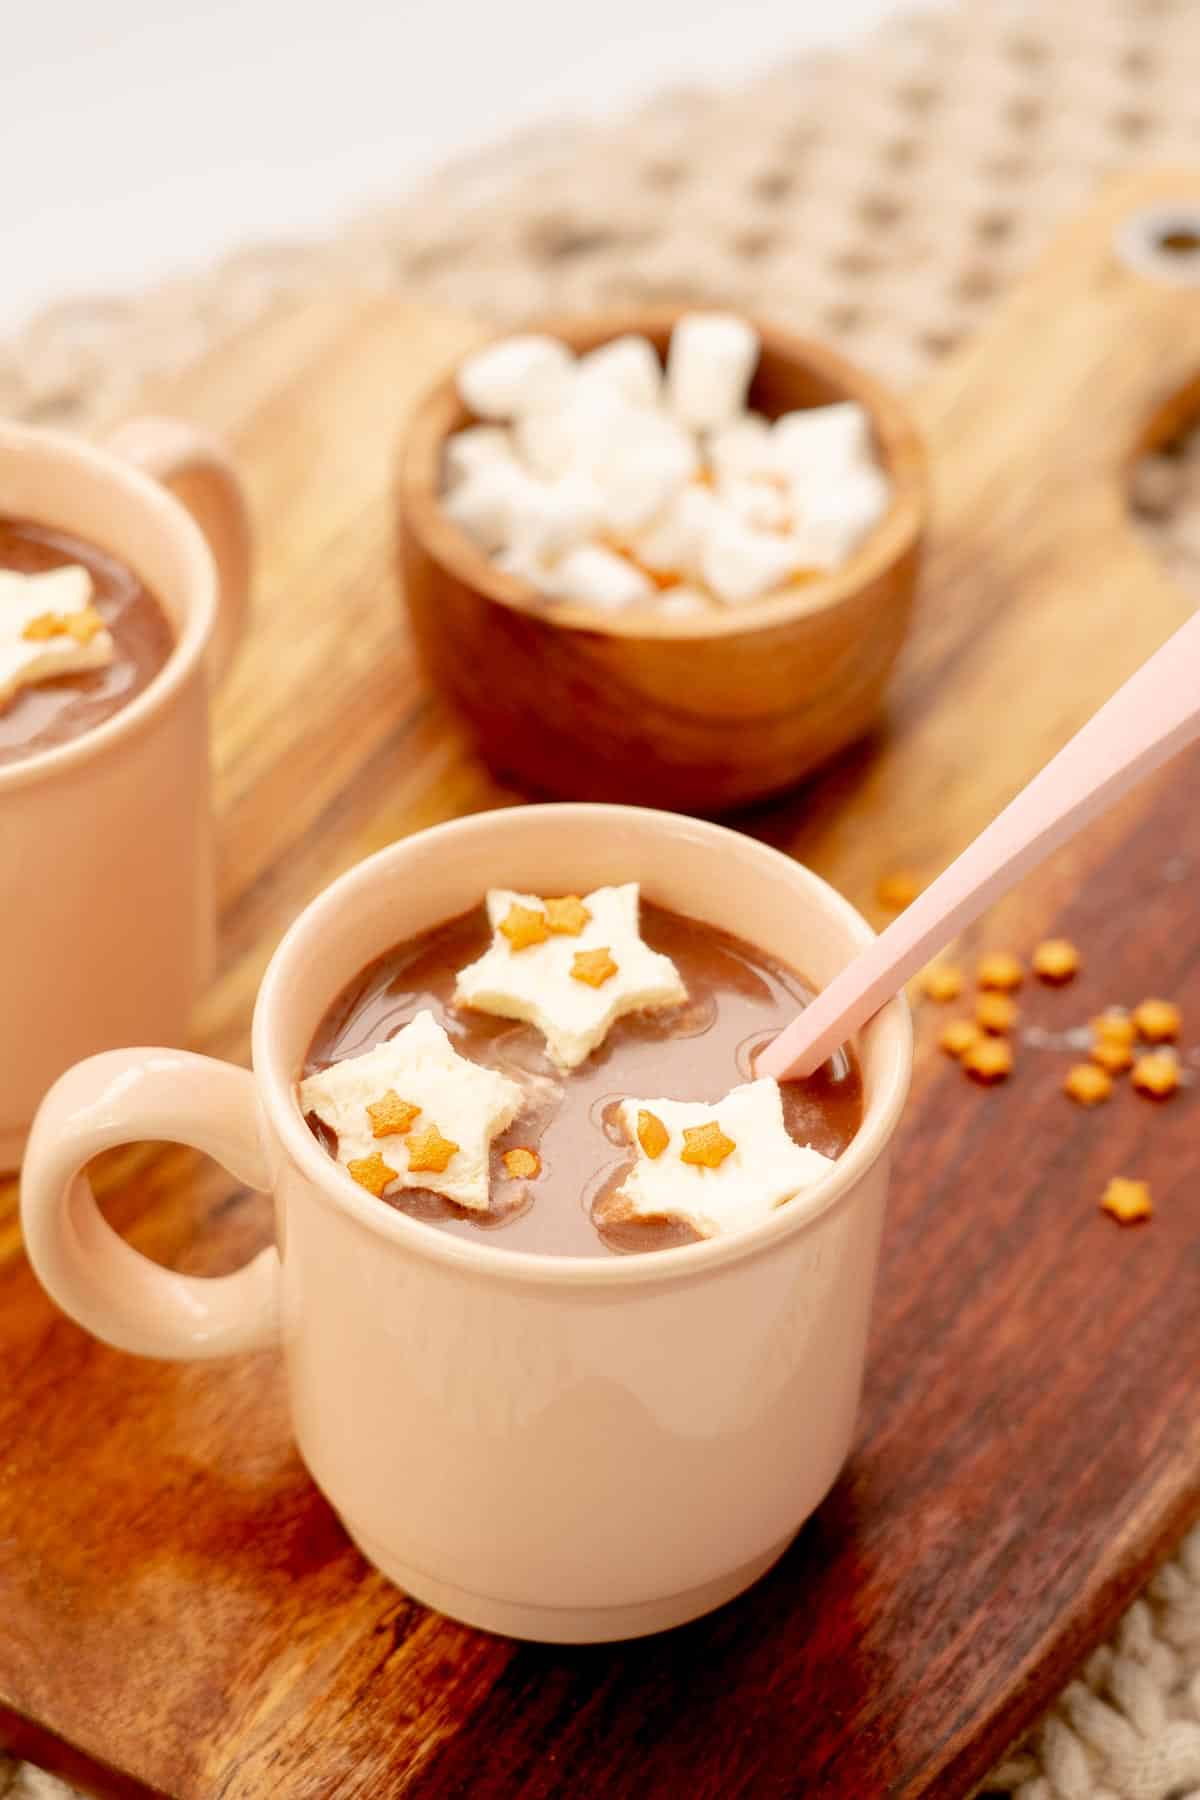 Hot chocolates topped with floating star-shaped hot chocolate toppers and star sprinkles.